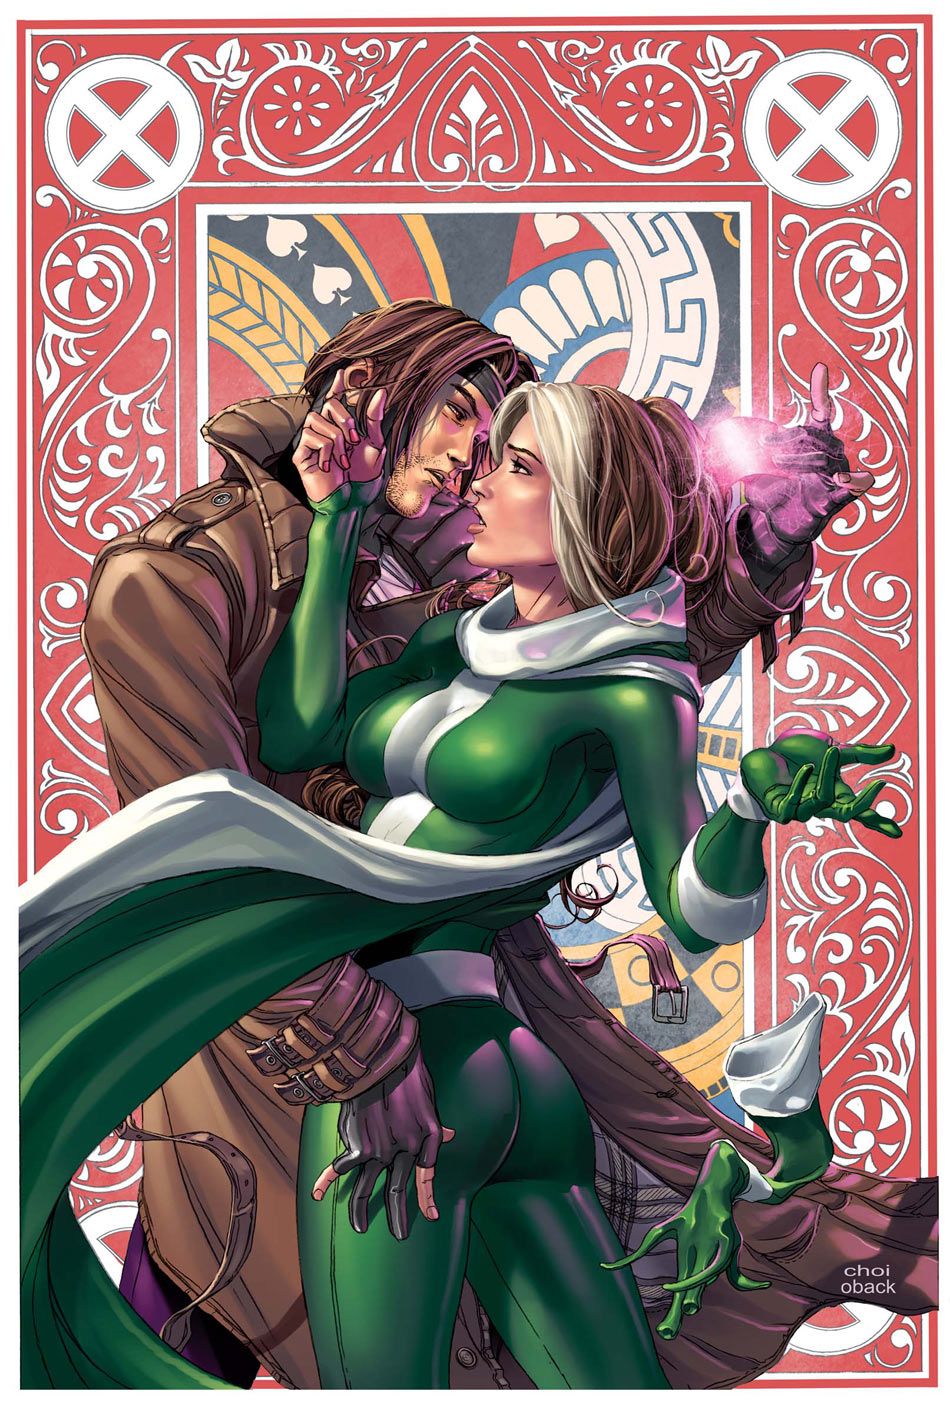 Gambit & Rogue (X-Men).  This is one of my favorite covers ever.